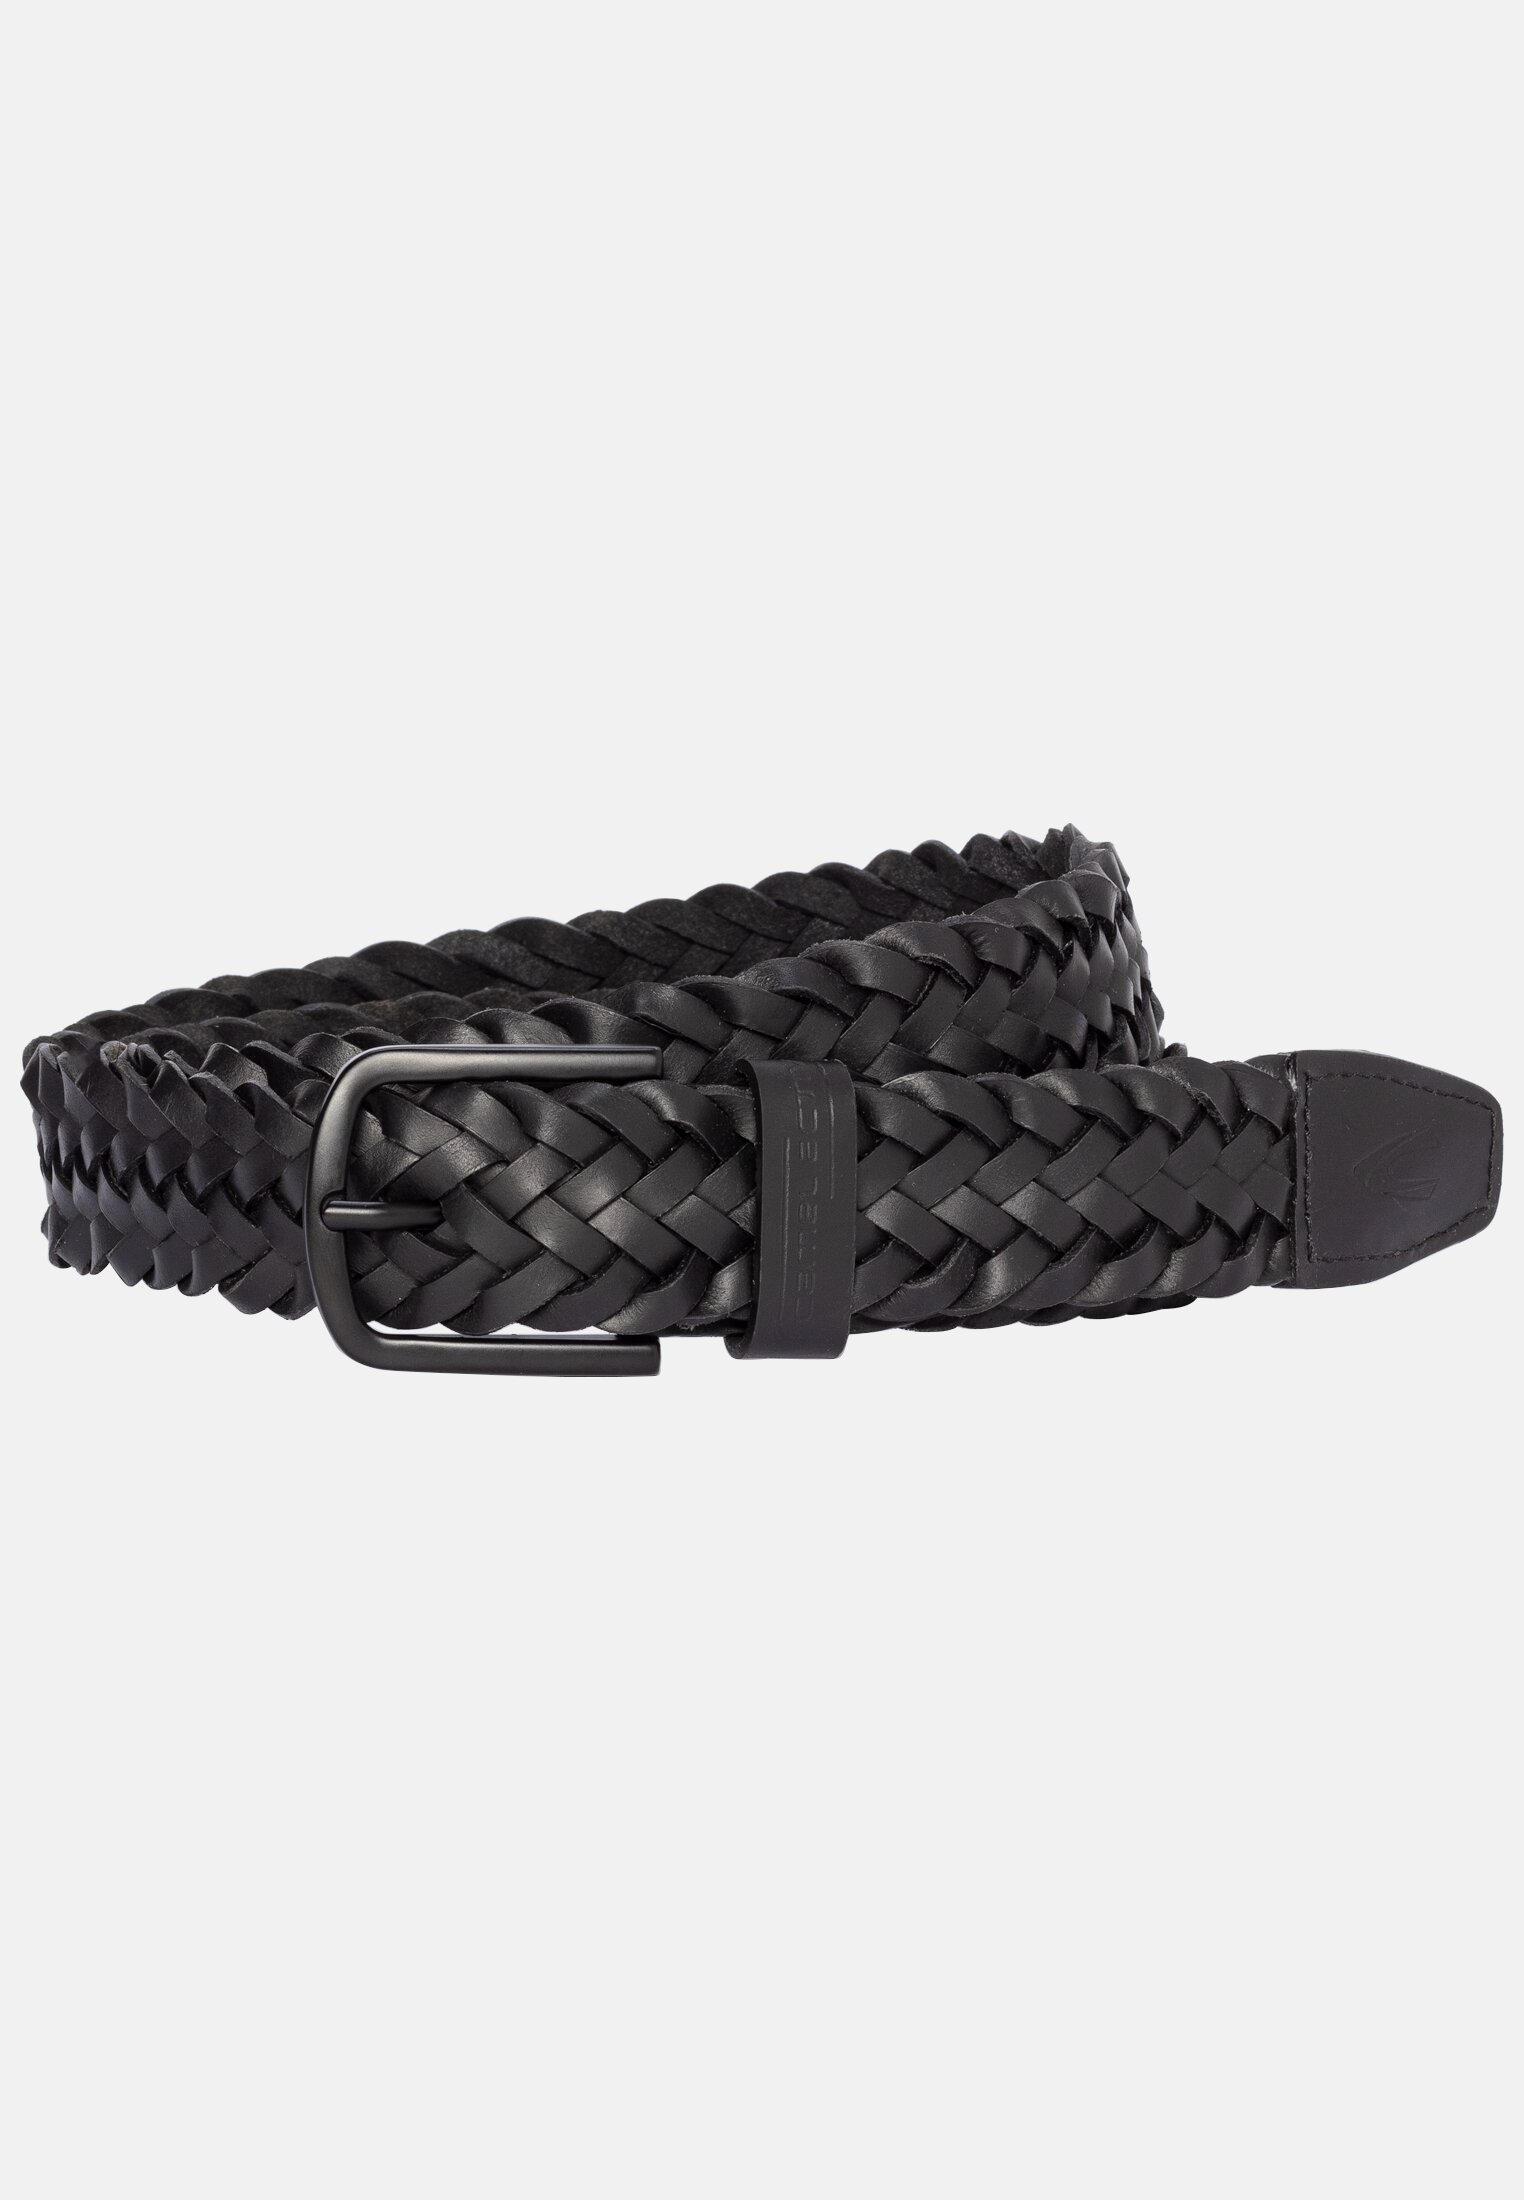 Camel Active Braided leather belt